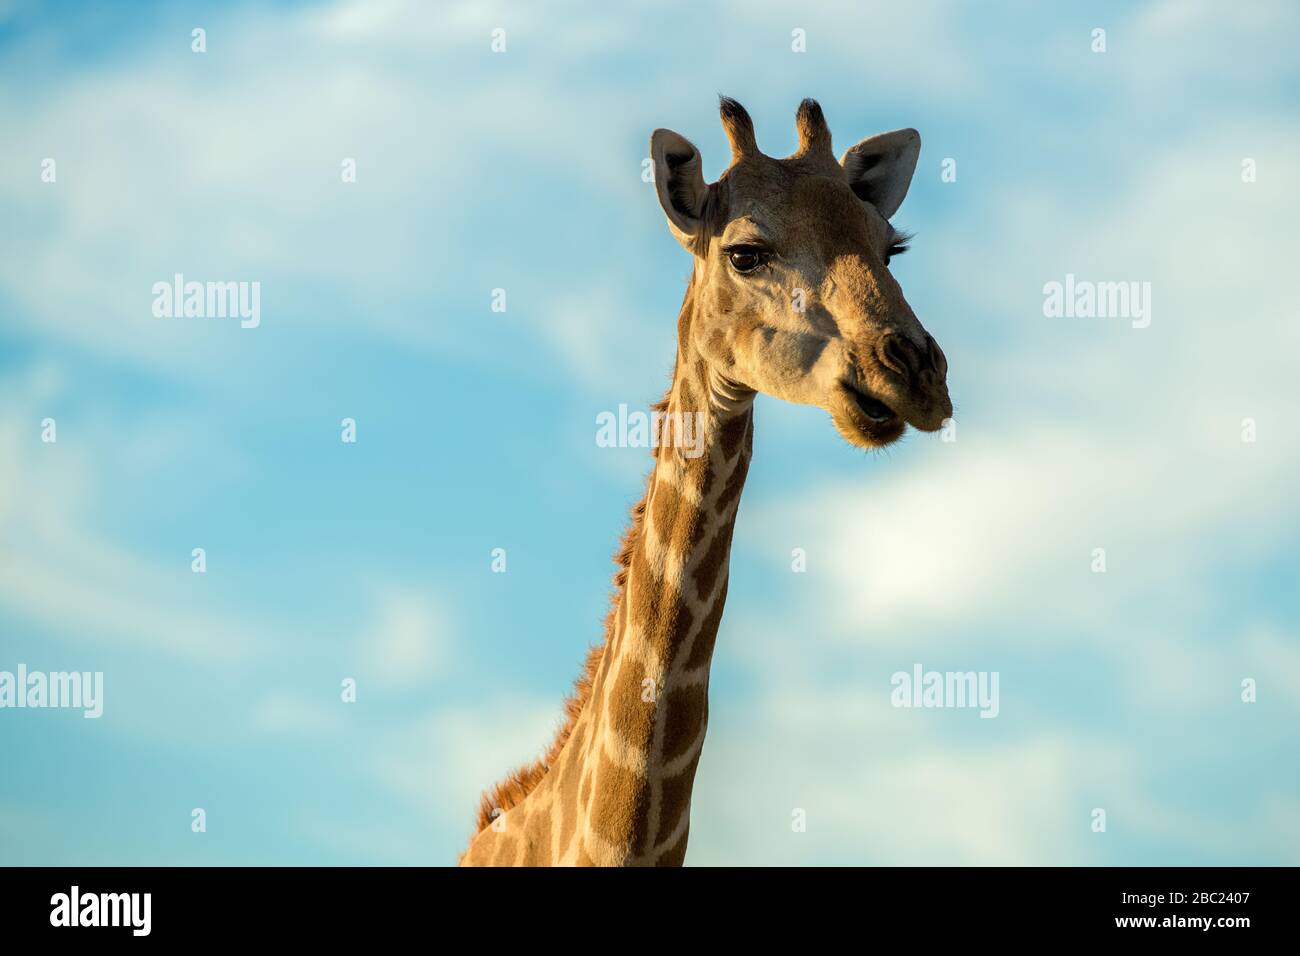 A cute close up portrait of a giraffe's head and neck against a blue sky with white clouds, taken at sunrise at the Augrabies Falls National Park in S Stock Photo